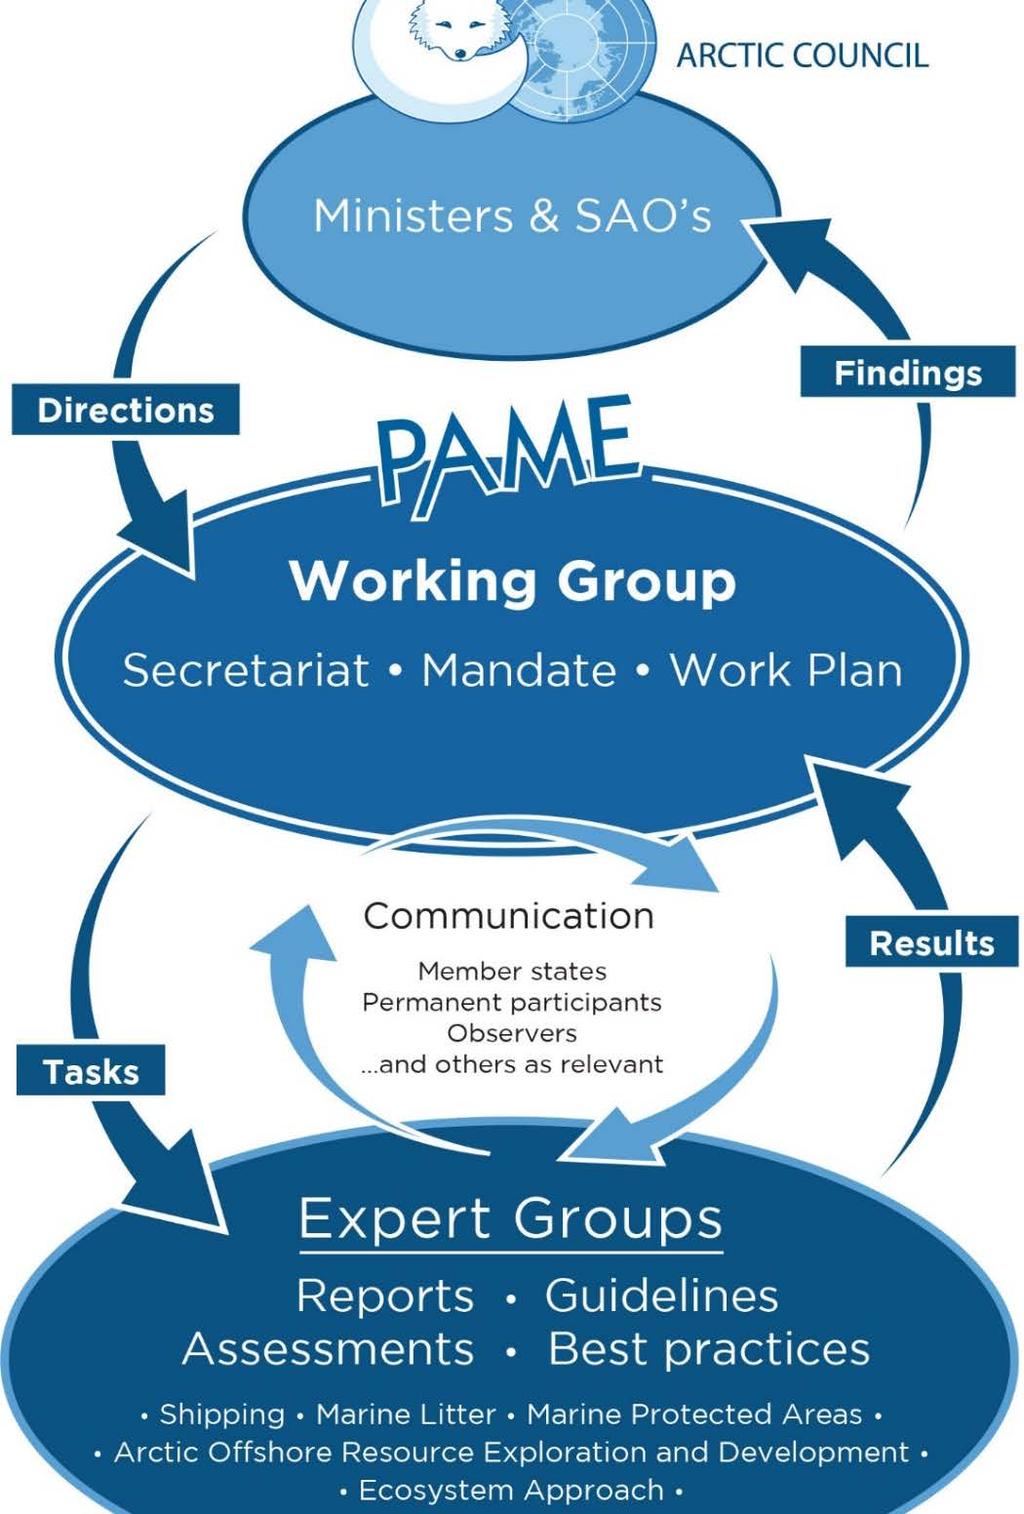 PAME First established in 1993 (Arctic Environmental Protection Strategy) Arctic Council Working Group since 1996.